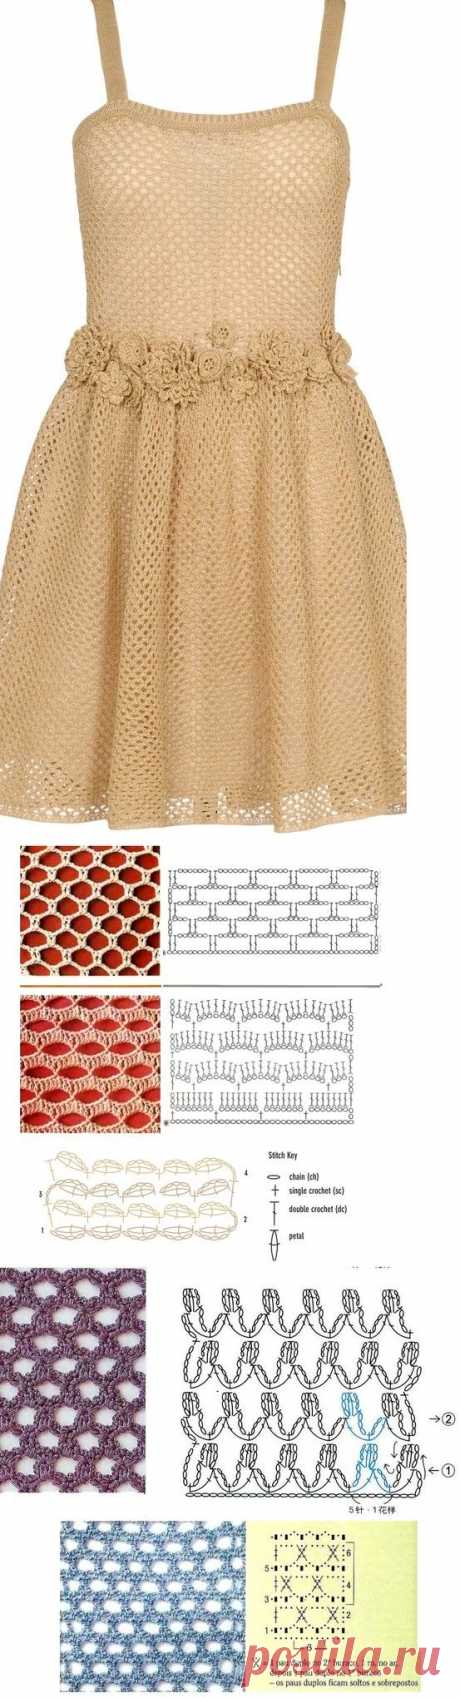 Valentino crochet dress - here are some possible mesh stitches to make it...